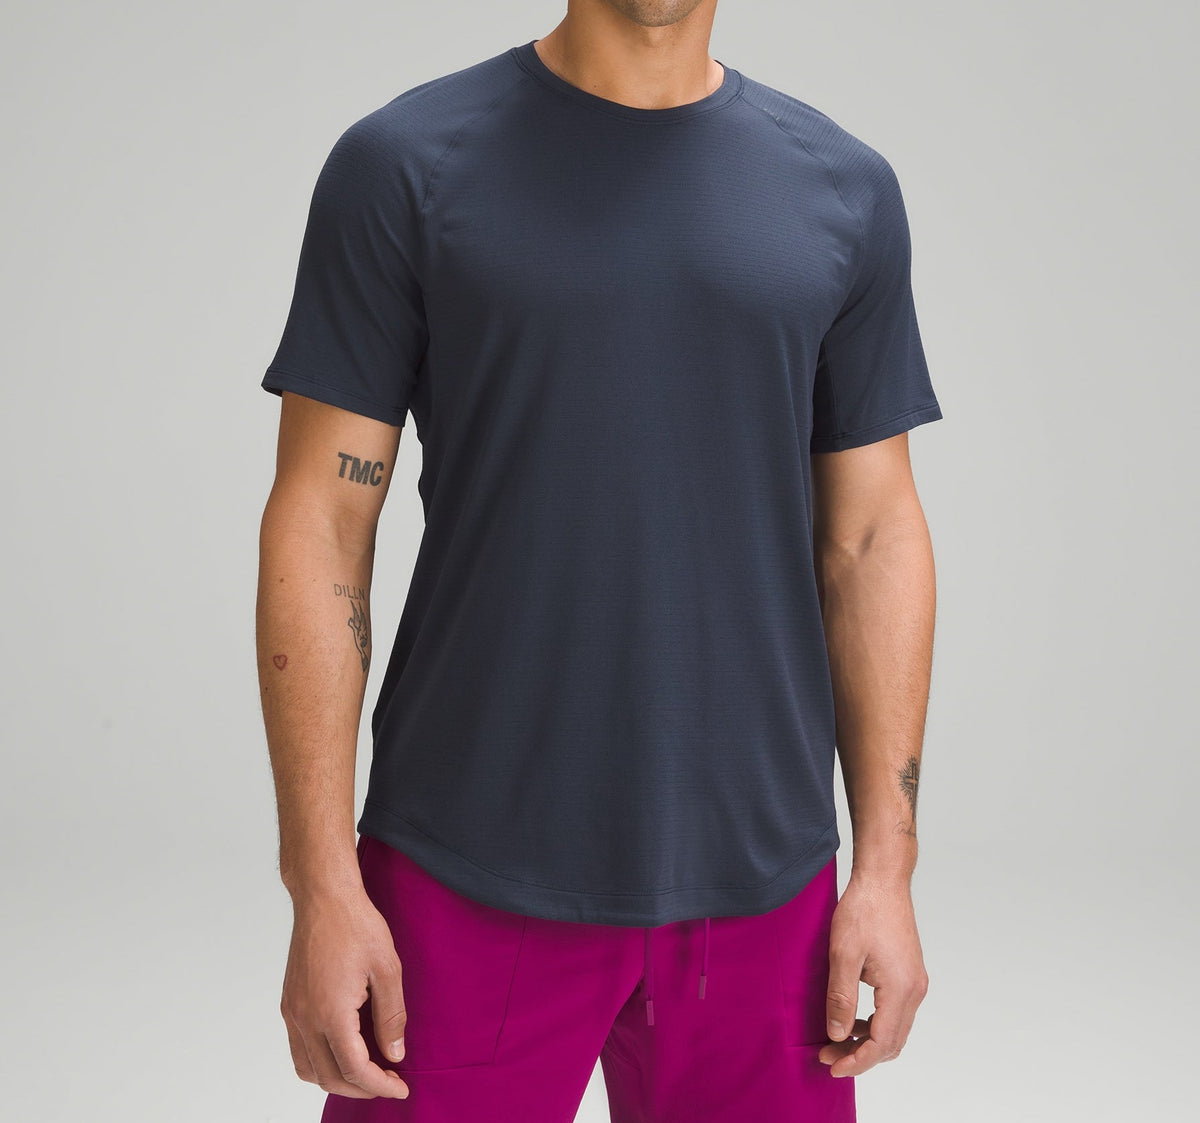 Lululemon License to Train Short Sleeve – The Shop at Equinox